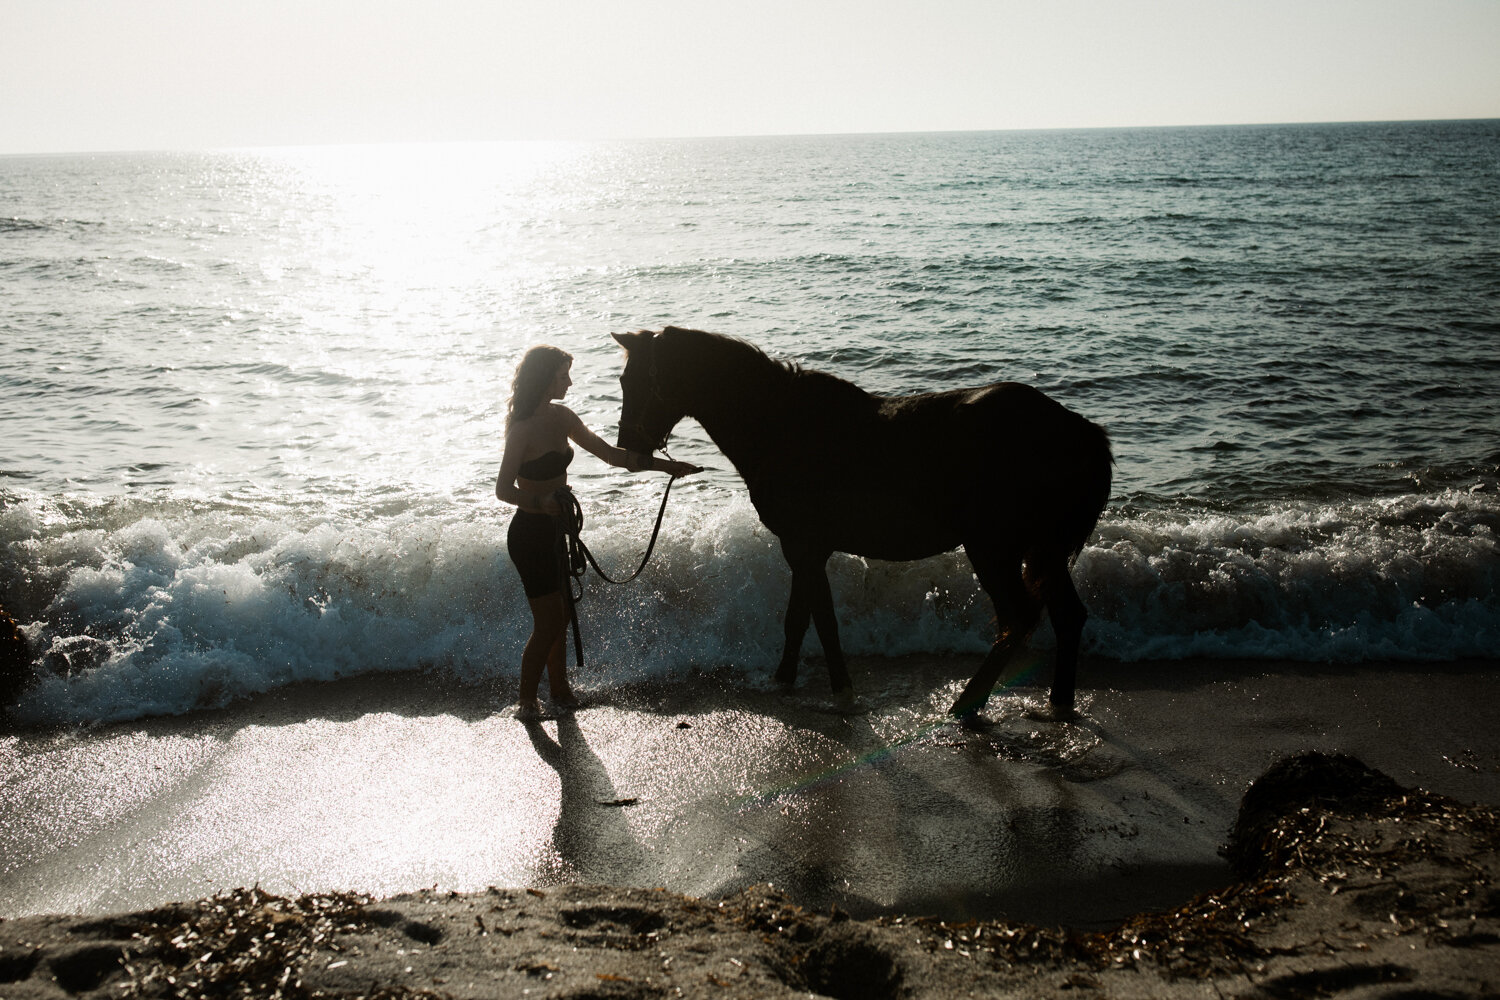 Immortale corsica corse beauty products beautiful horse model produits beaute beach travel Krista Espino sea island mediterranean photographe photographer fashion lifestyle editorial nature natural france french skin skincare face mask rose country-1.jpg